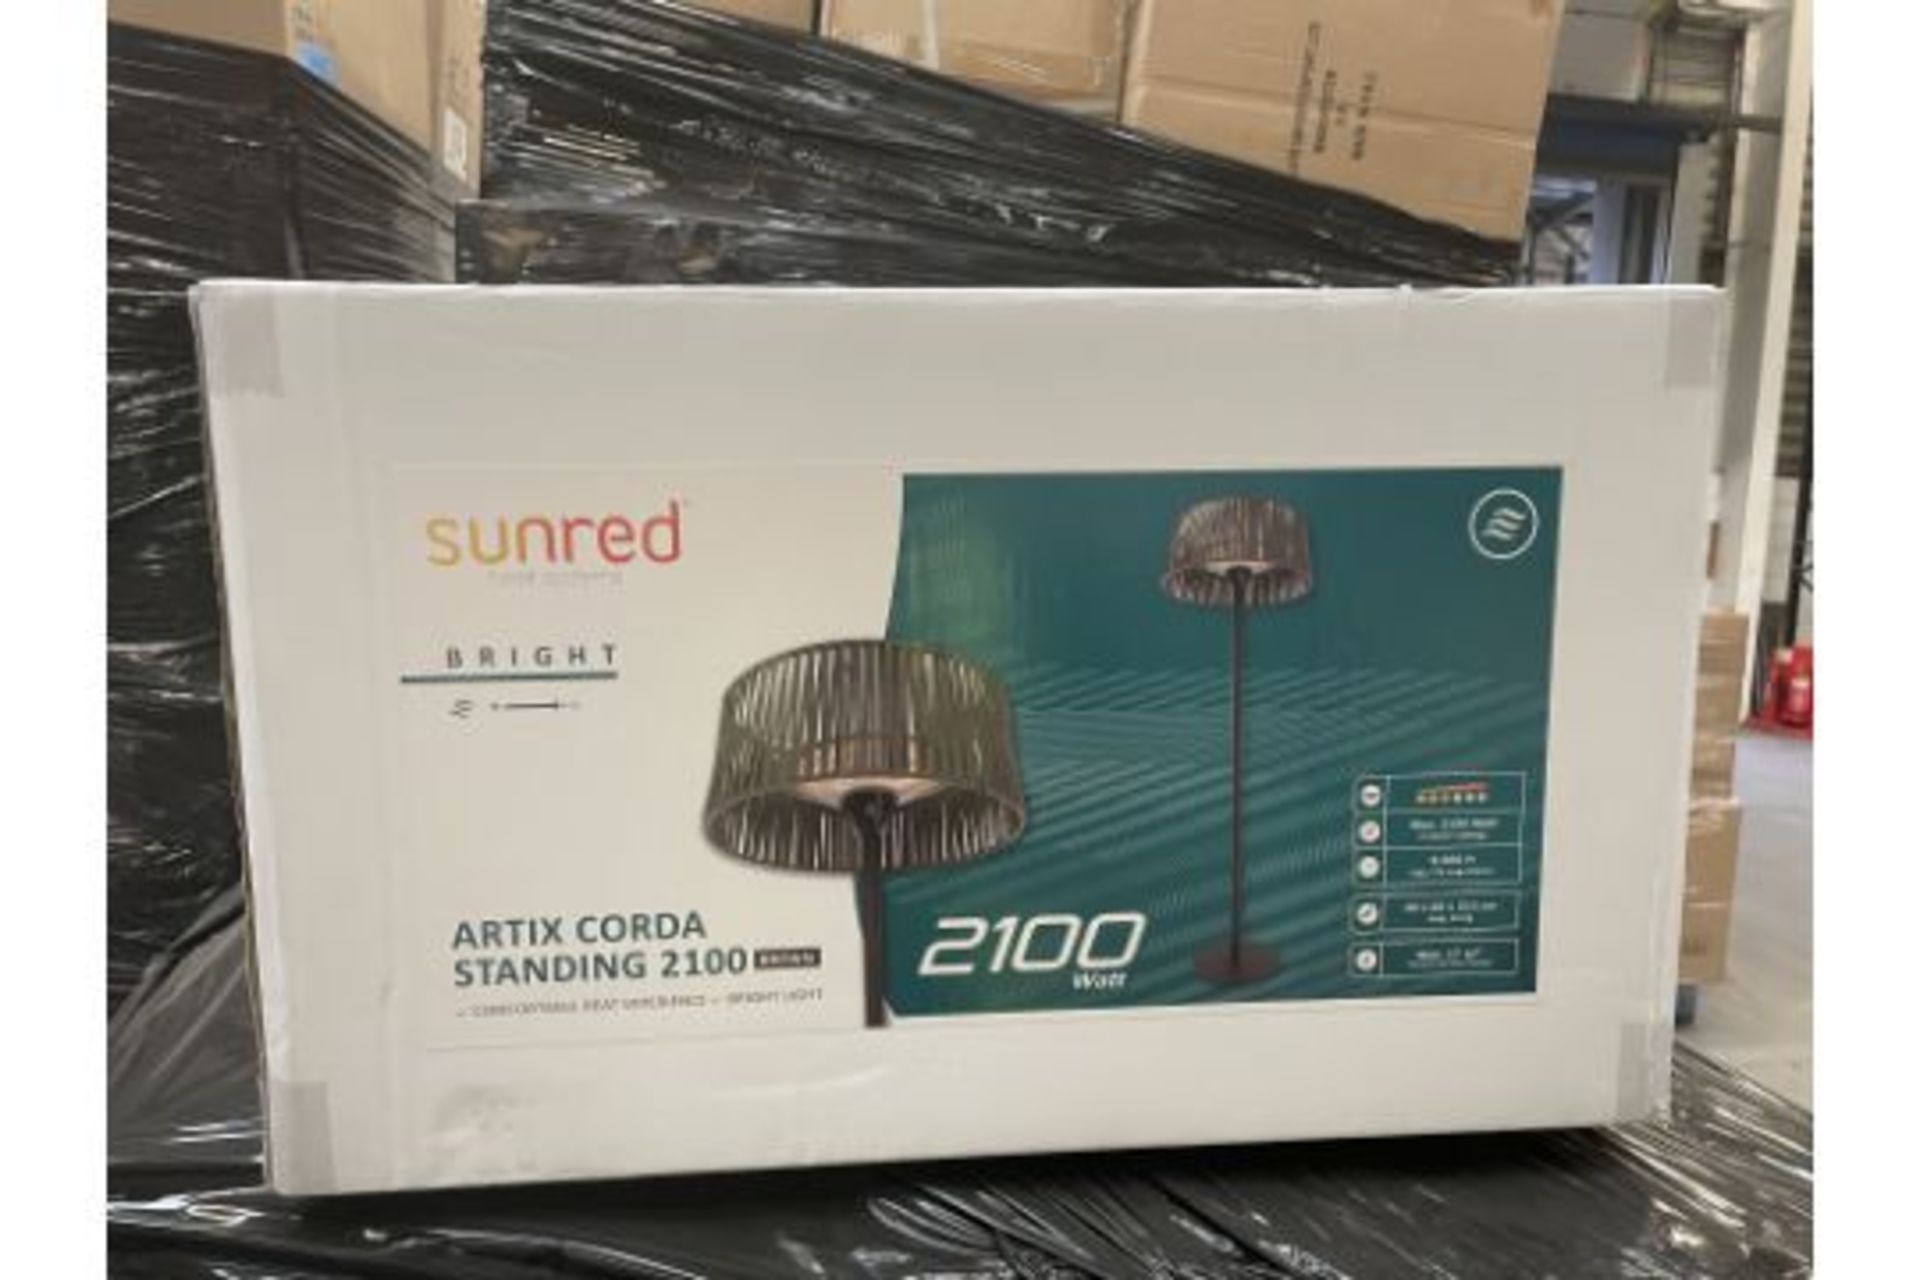 Brand New The Sunred Heater Artix Corda Standing 2100W RRP £429. A high quality and efficient - Image 2 of 2